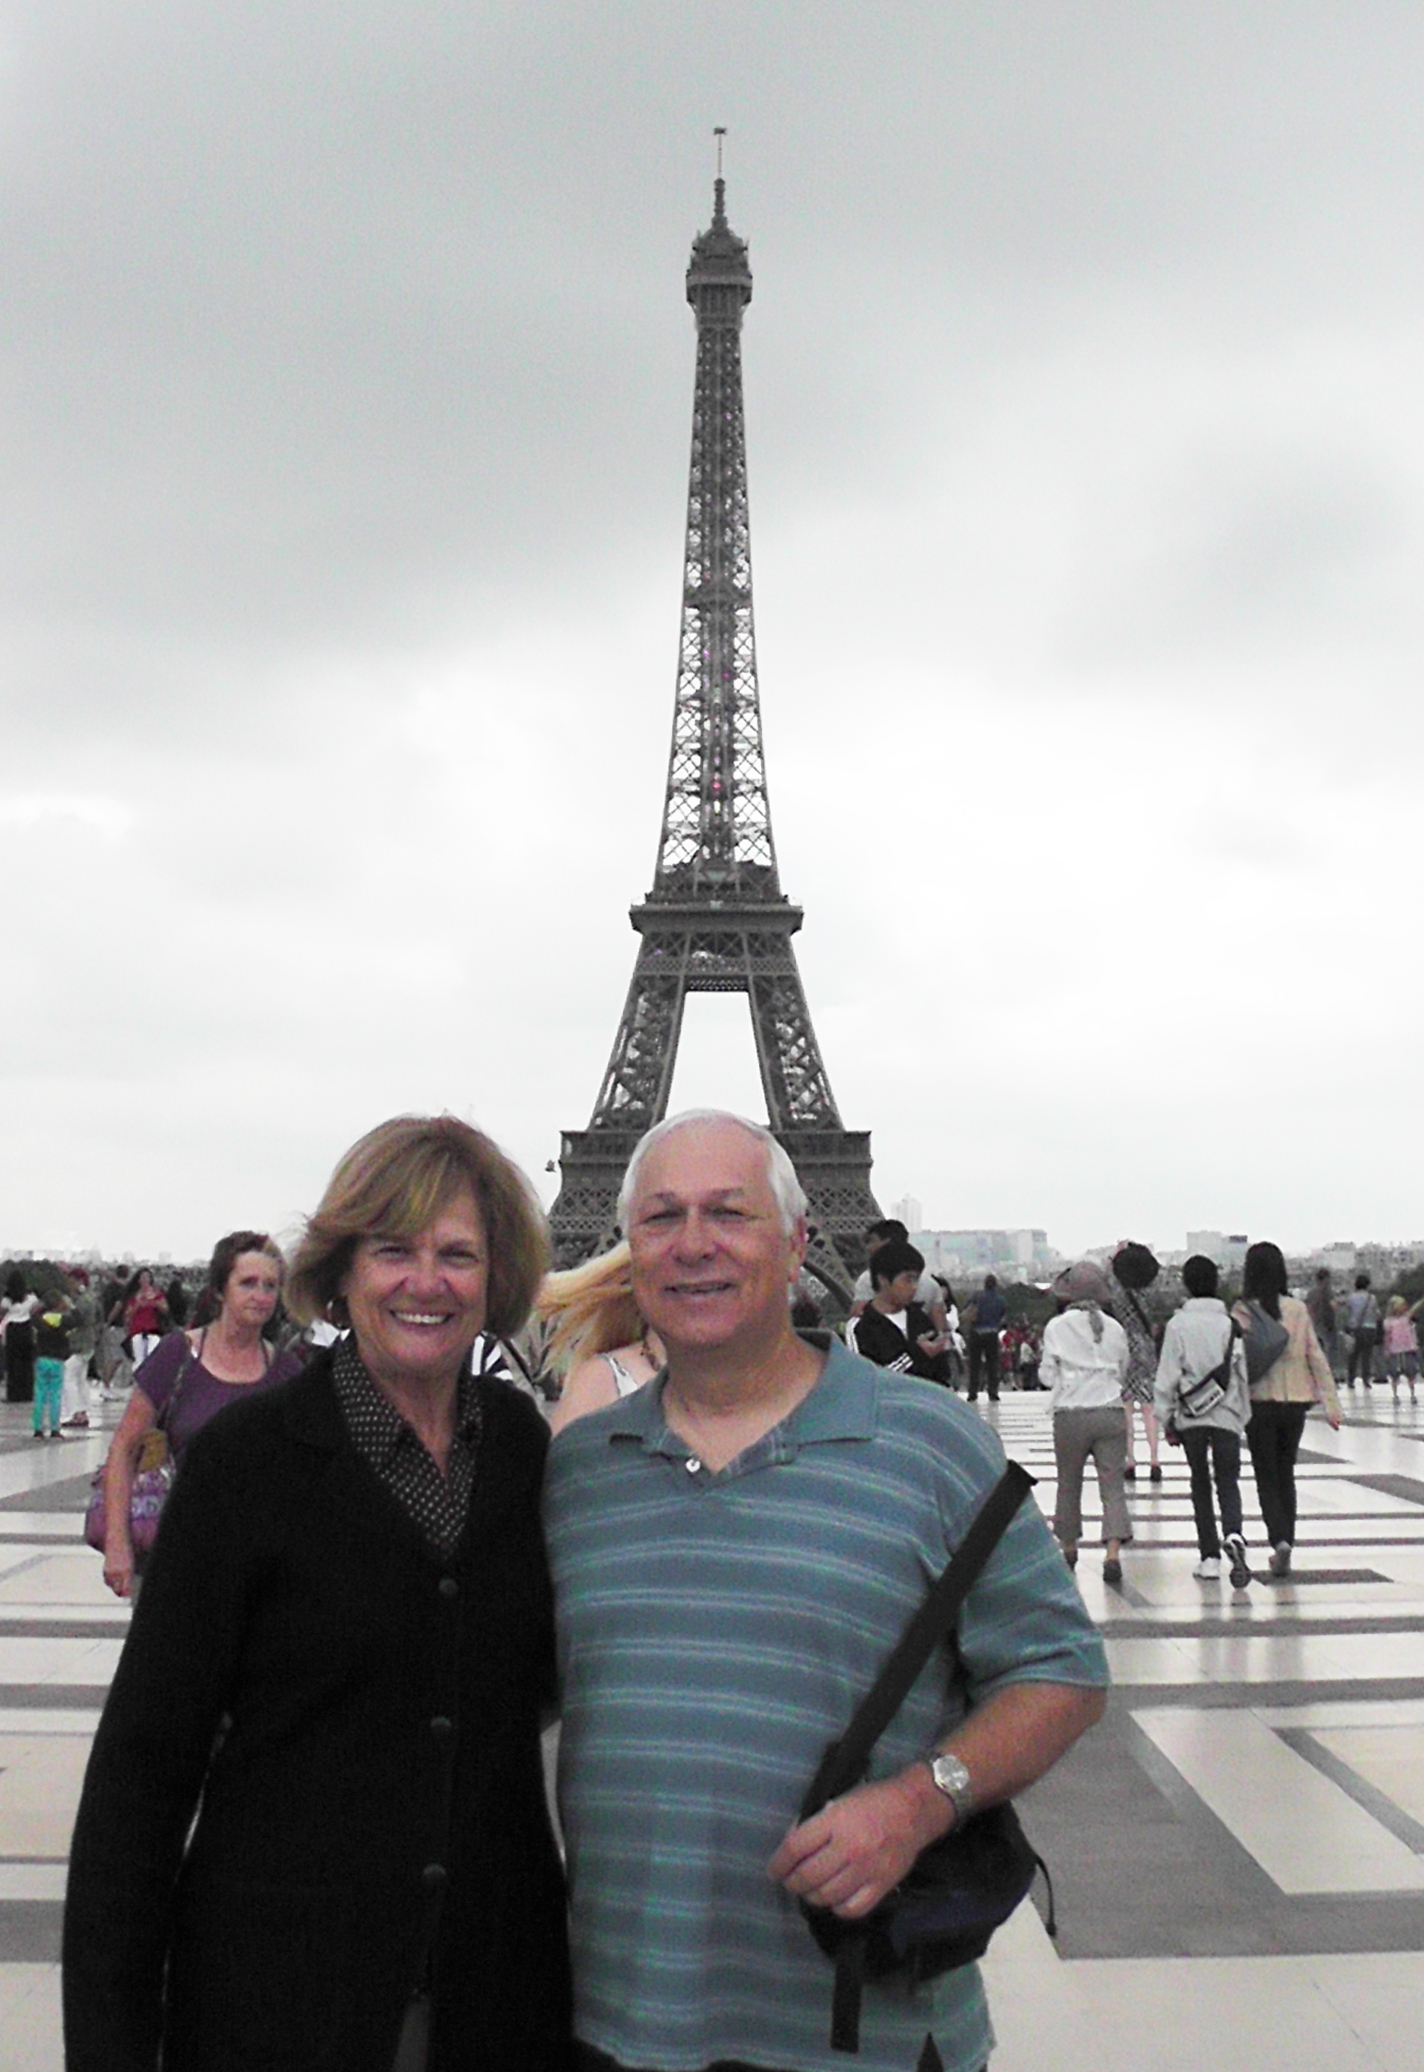 20140712 Susan and Charles in front of Eiffel Tower in Paris France